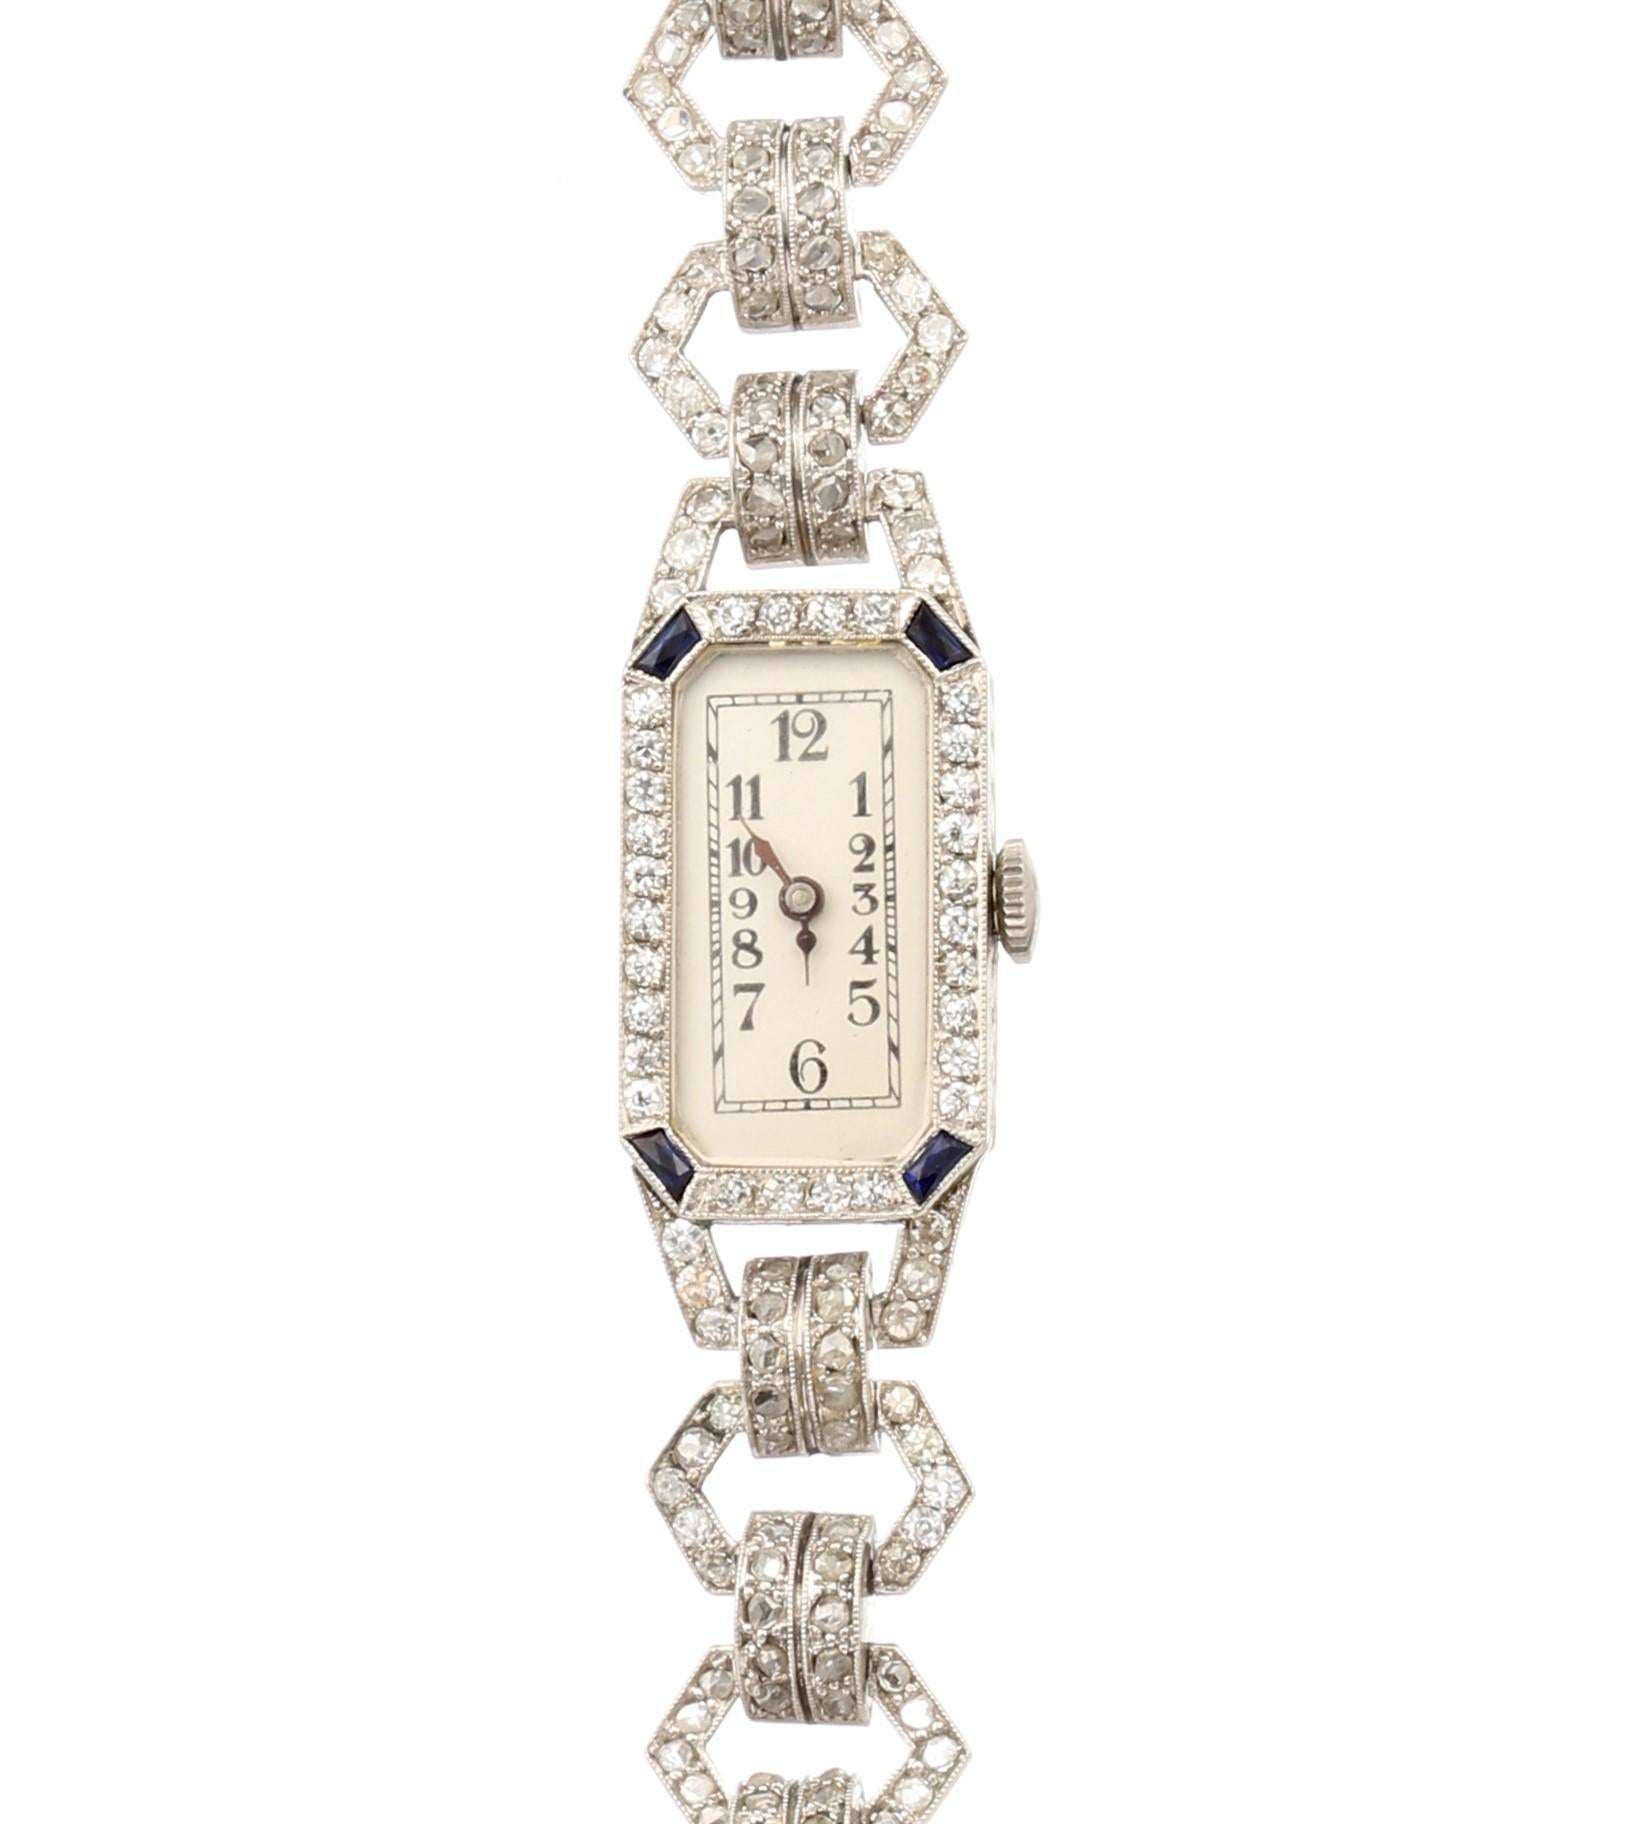 Beautiful Zenith art deco watch in platinum paved with 146 8/8 cut diamonds, suede strap, mechanical movement with manual winding.

Case dimensions: 14.30 x 24.38 x 6.23 mm (0.563 x 0.960 x 0.245 inch)

Total estimated weight of diamonds: 1.46